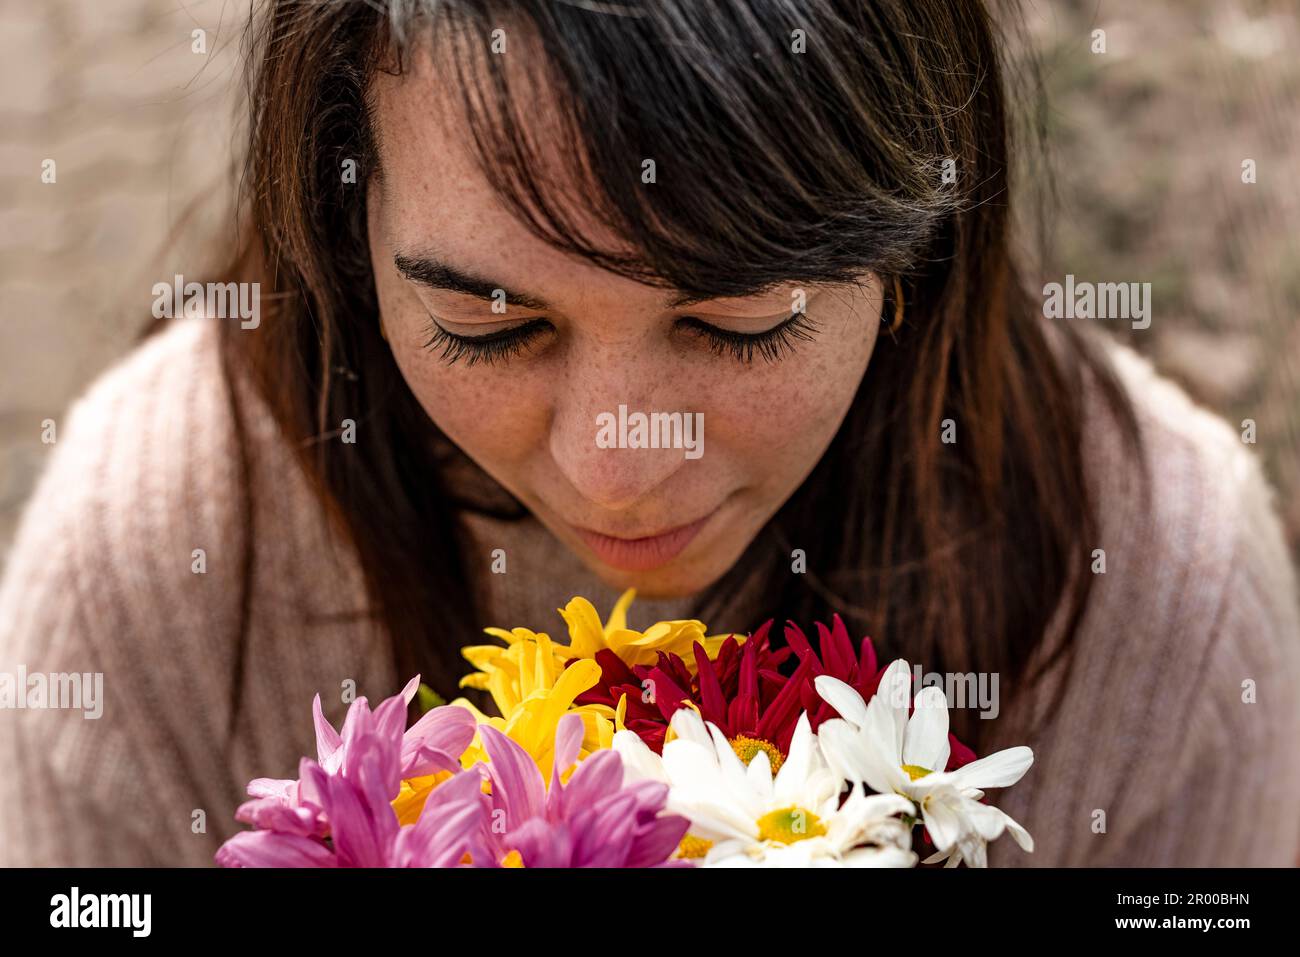 High angle view of a young woman smelling a bouquet of daisies in her hands. Close-up. Stock Photo